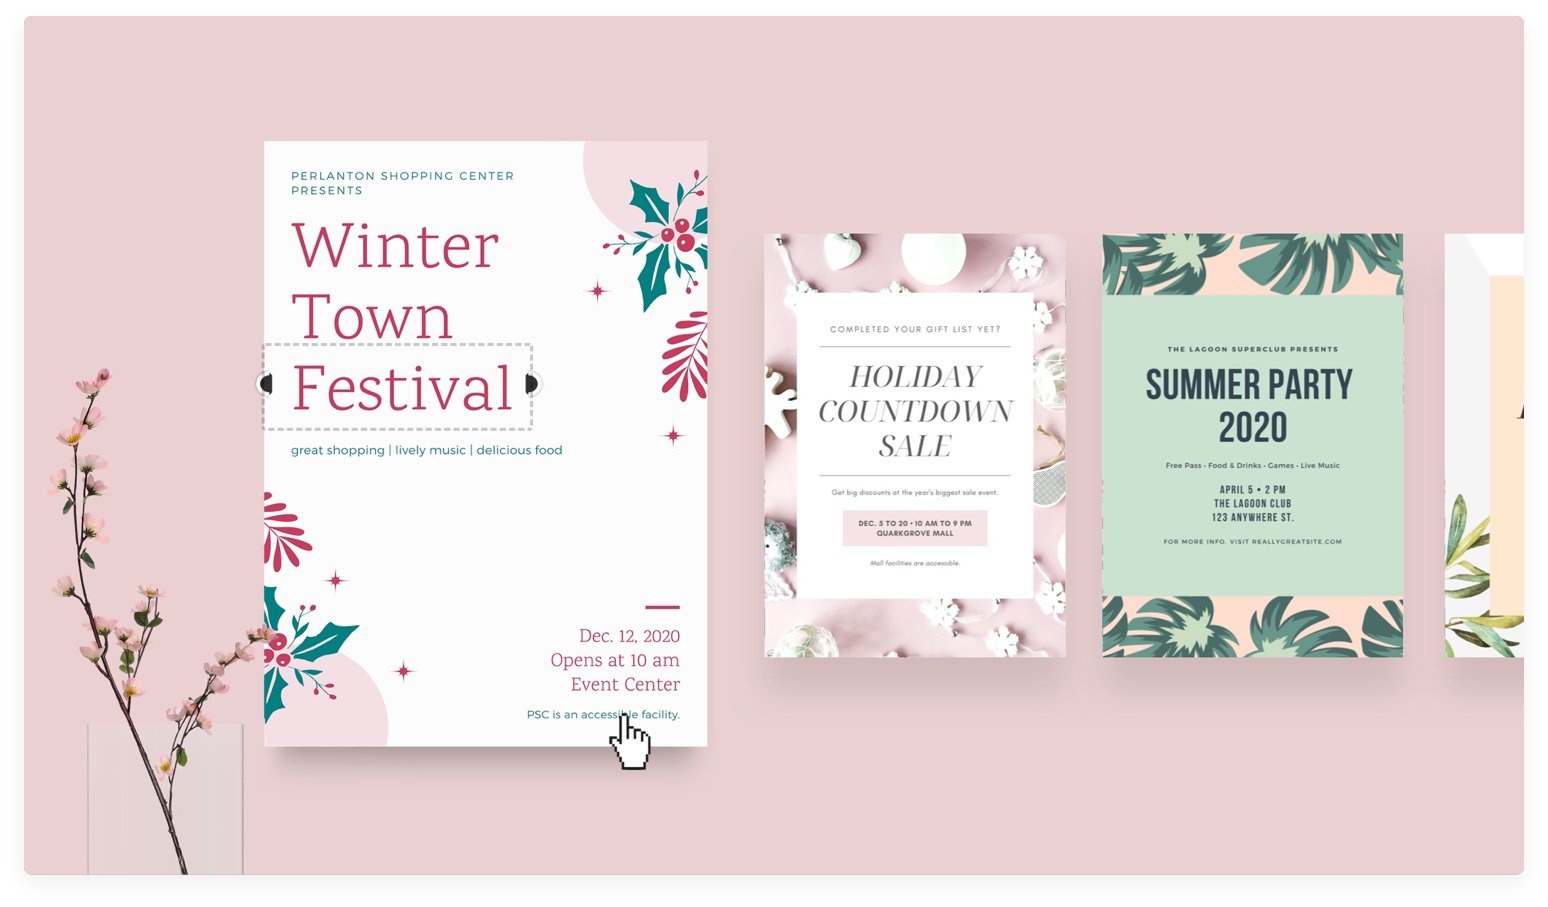 Free Online Flyer Maker: Design Custom Flyers With Canva - Create Your Own Free Printable Flyers